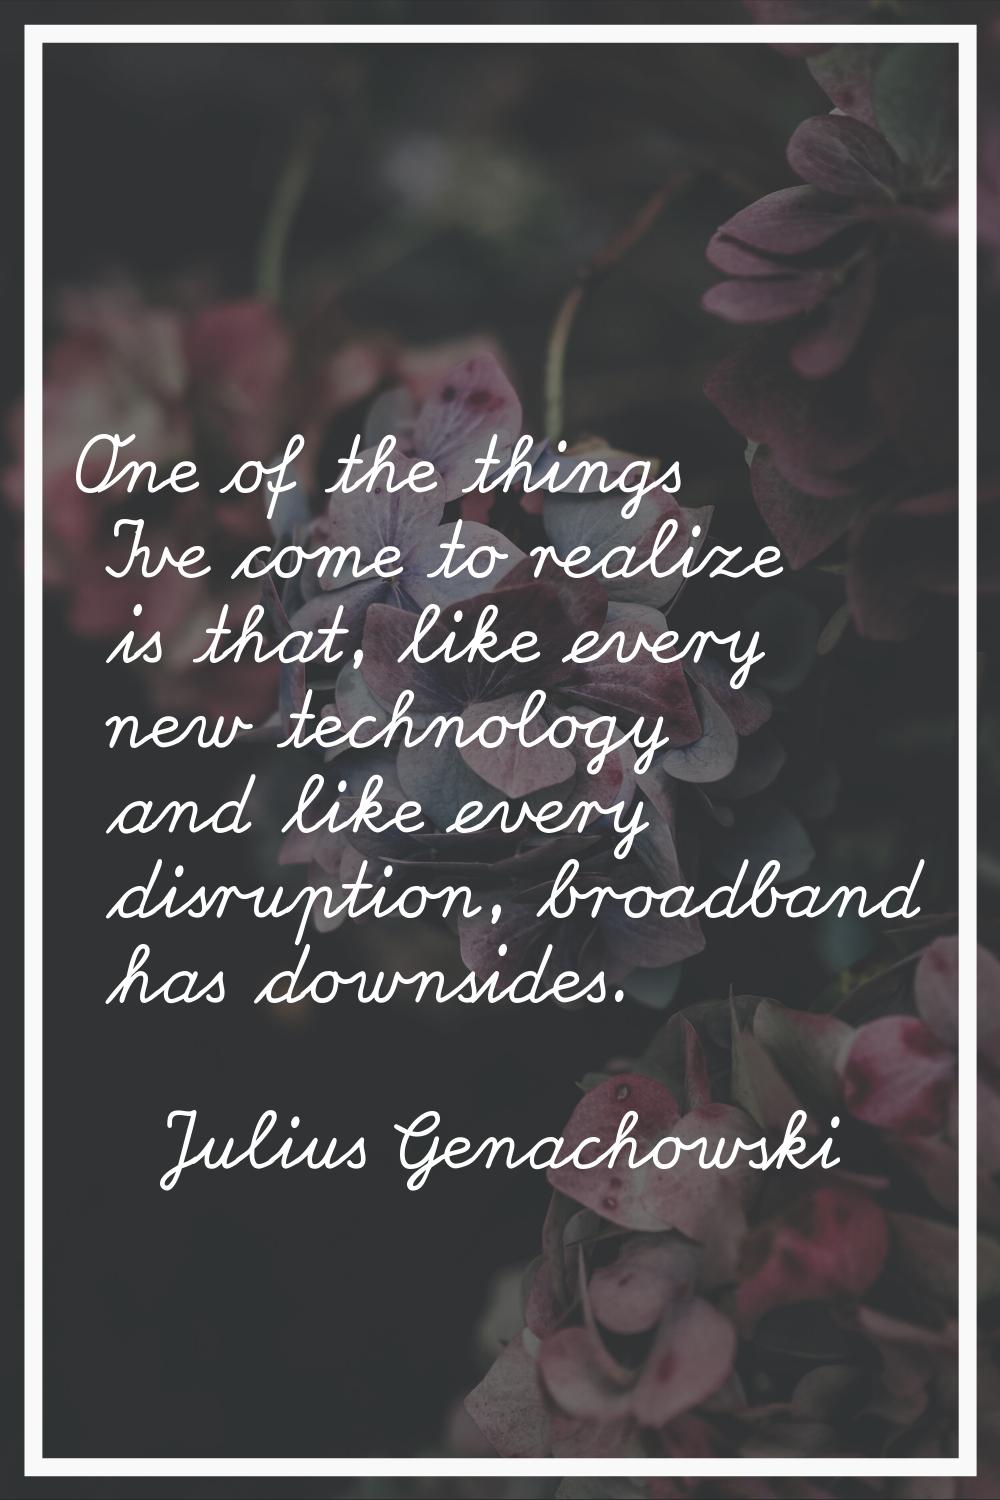 One of the things I've come to realize is that, like every new technology and like every disruption